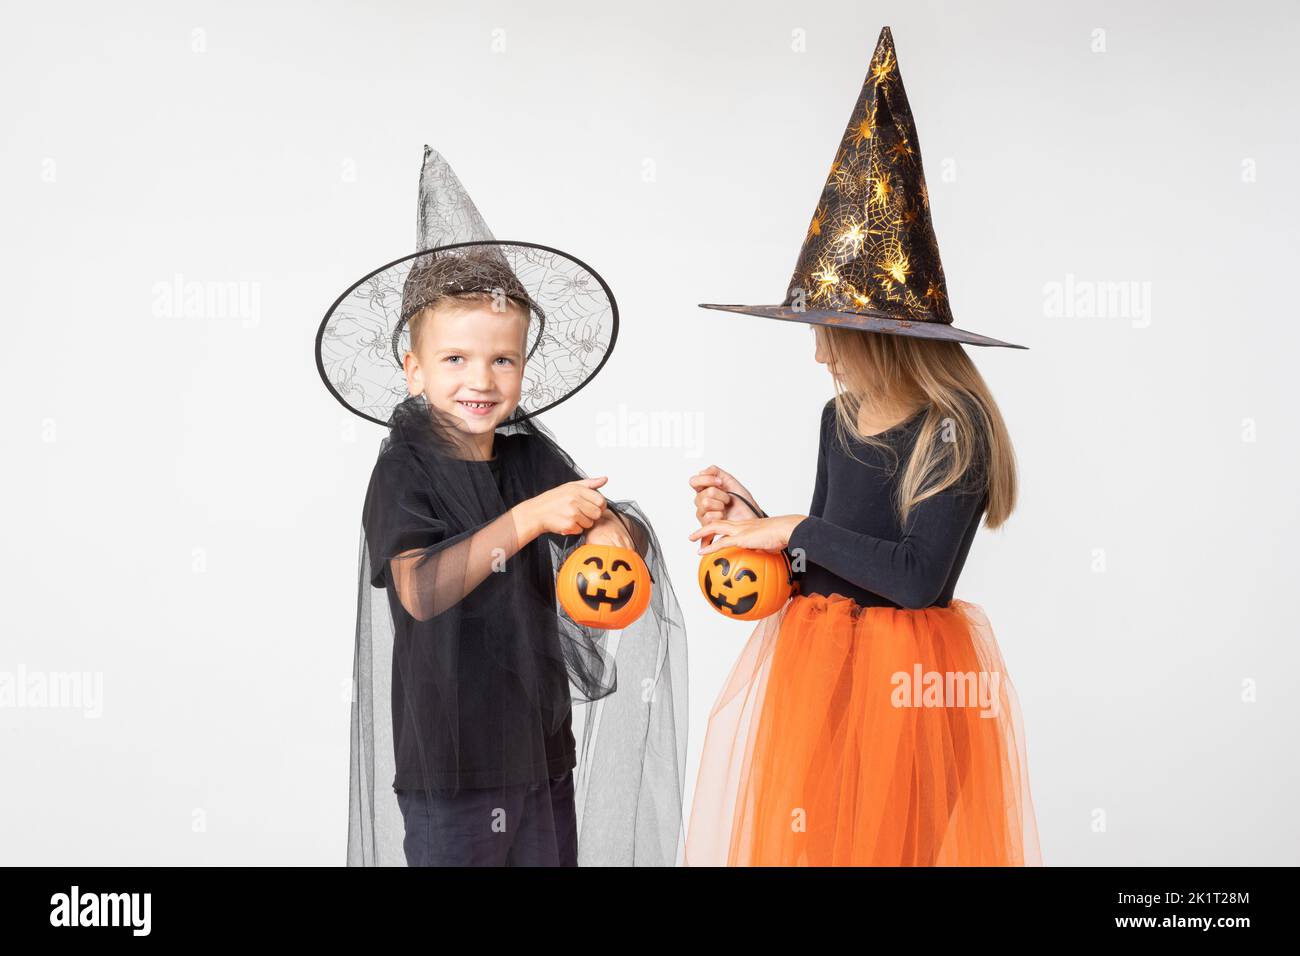 Kids Halloween. A beautiful girl in a witch costume and a boy in a wizard costume take out candy from a basket in the shape of Jack's lantern. Child h Stock Photo